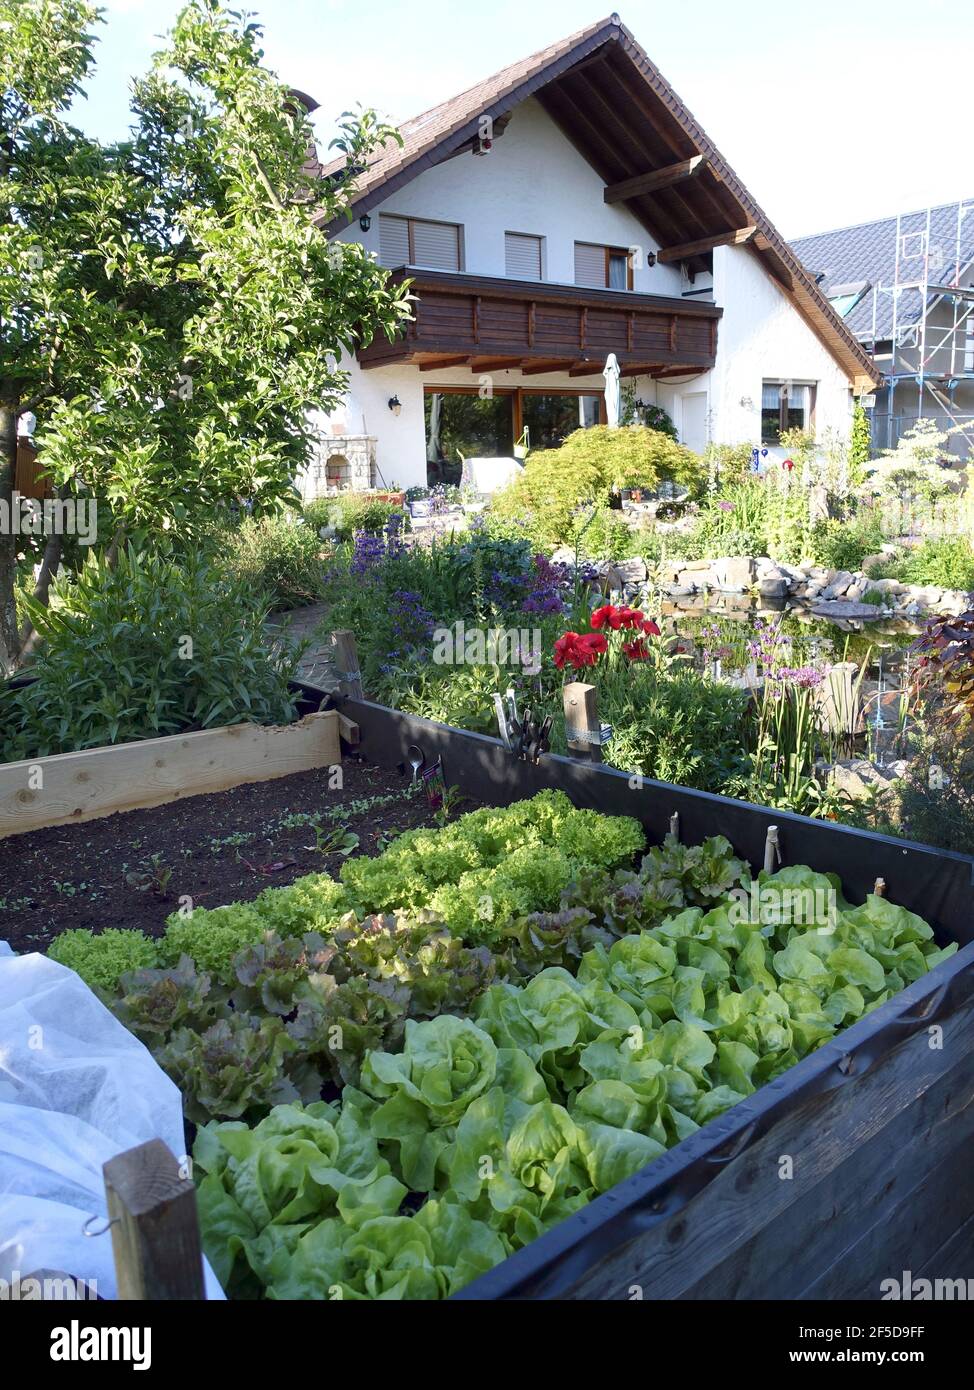 garden lettuce (Lactuca sativa), different lettuces in a raised bed, Germany Stock Photo